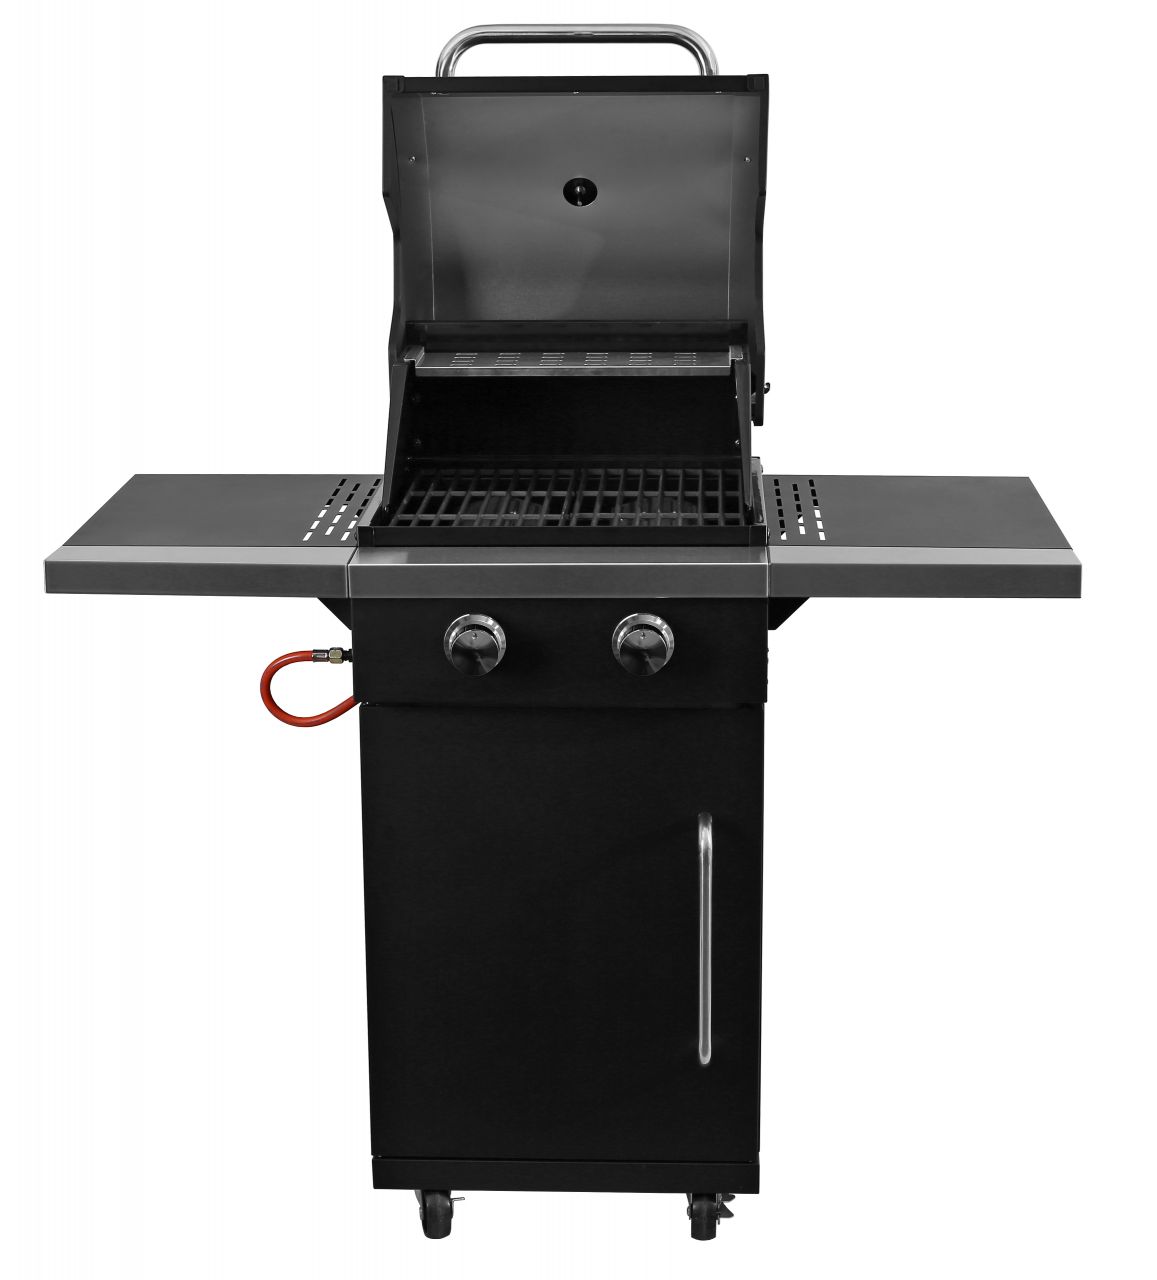 ACTIVA Lord 200 gázgrill